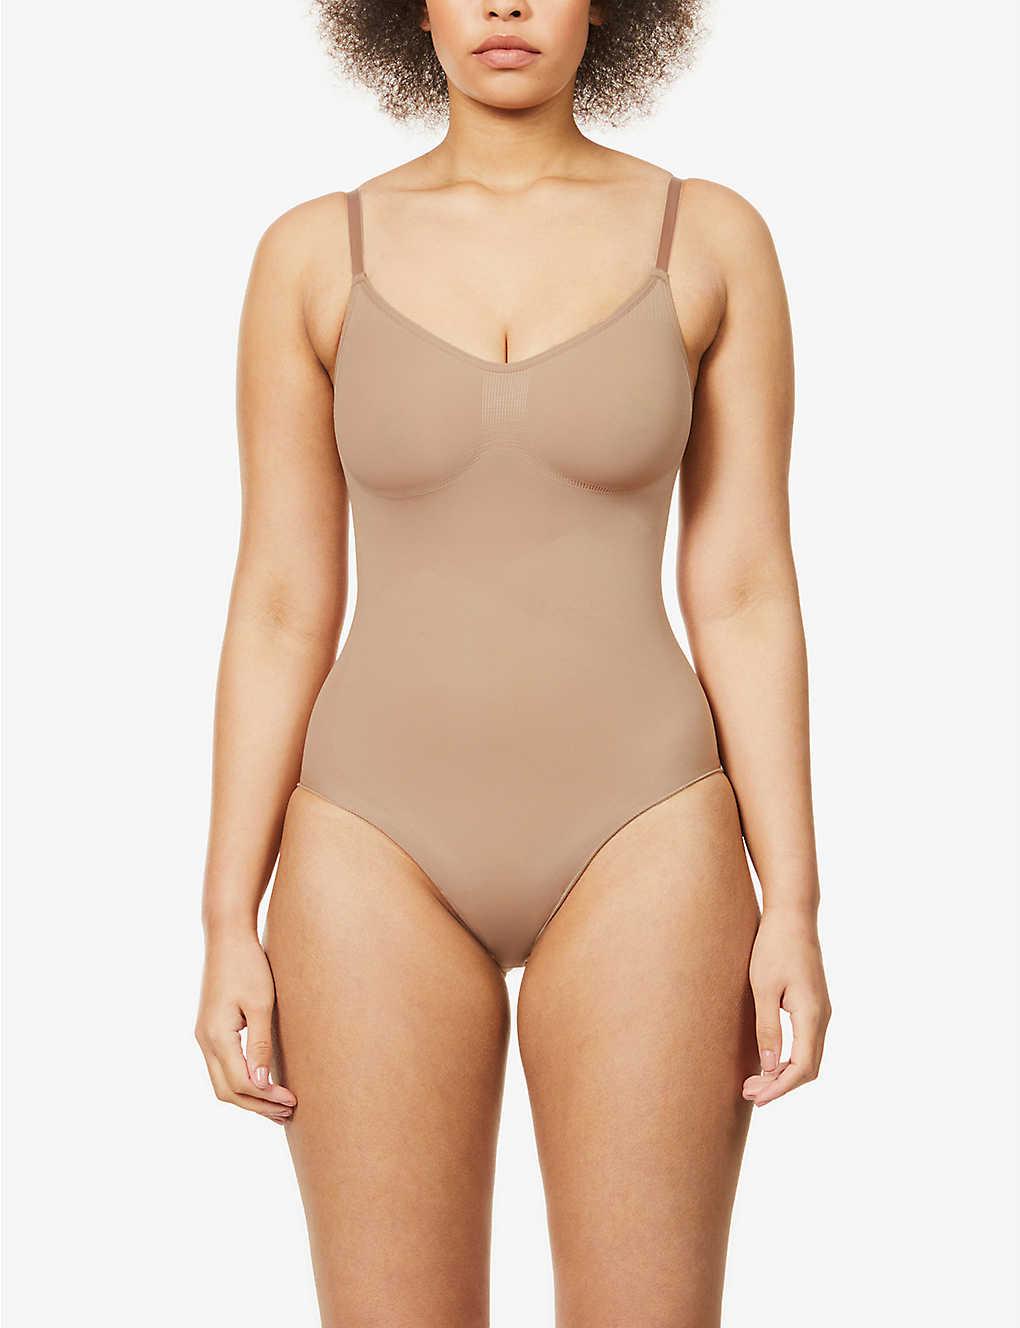 The Best Wedding Shapewear, from Thongs to Bodysuits